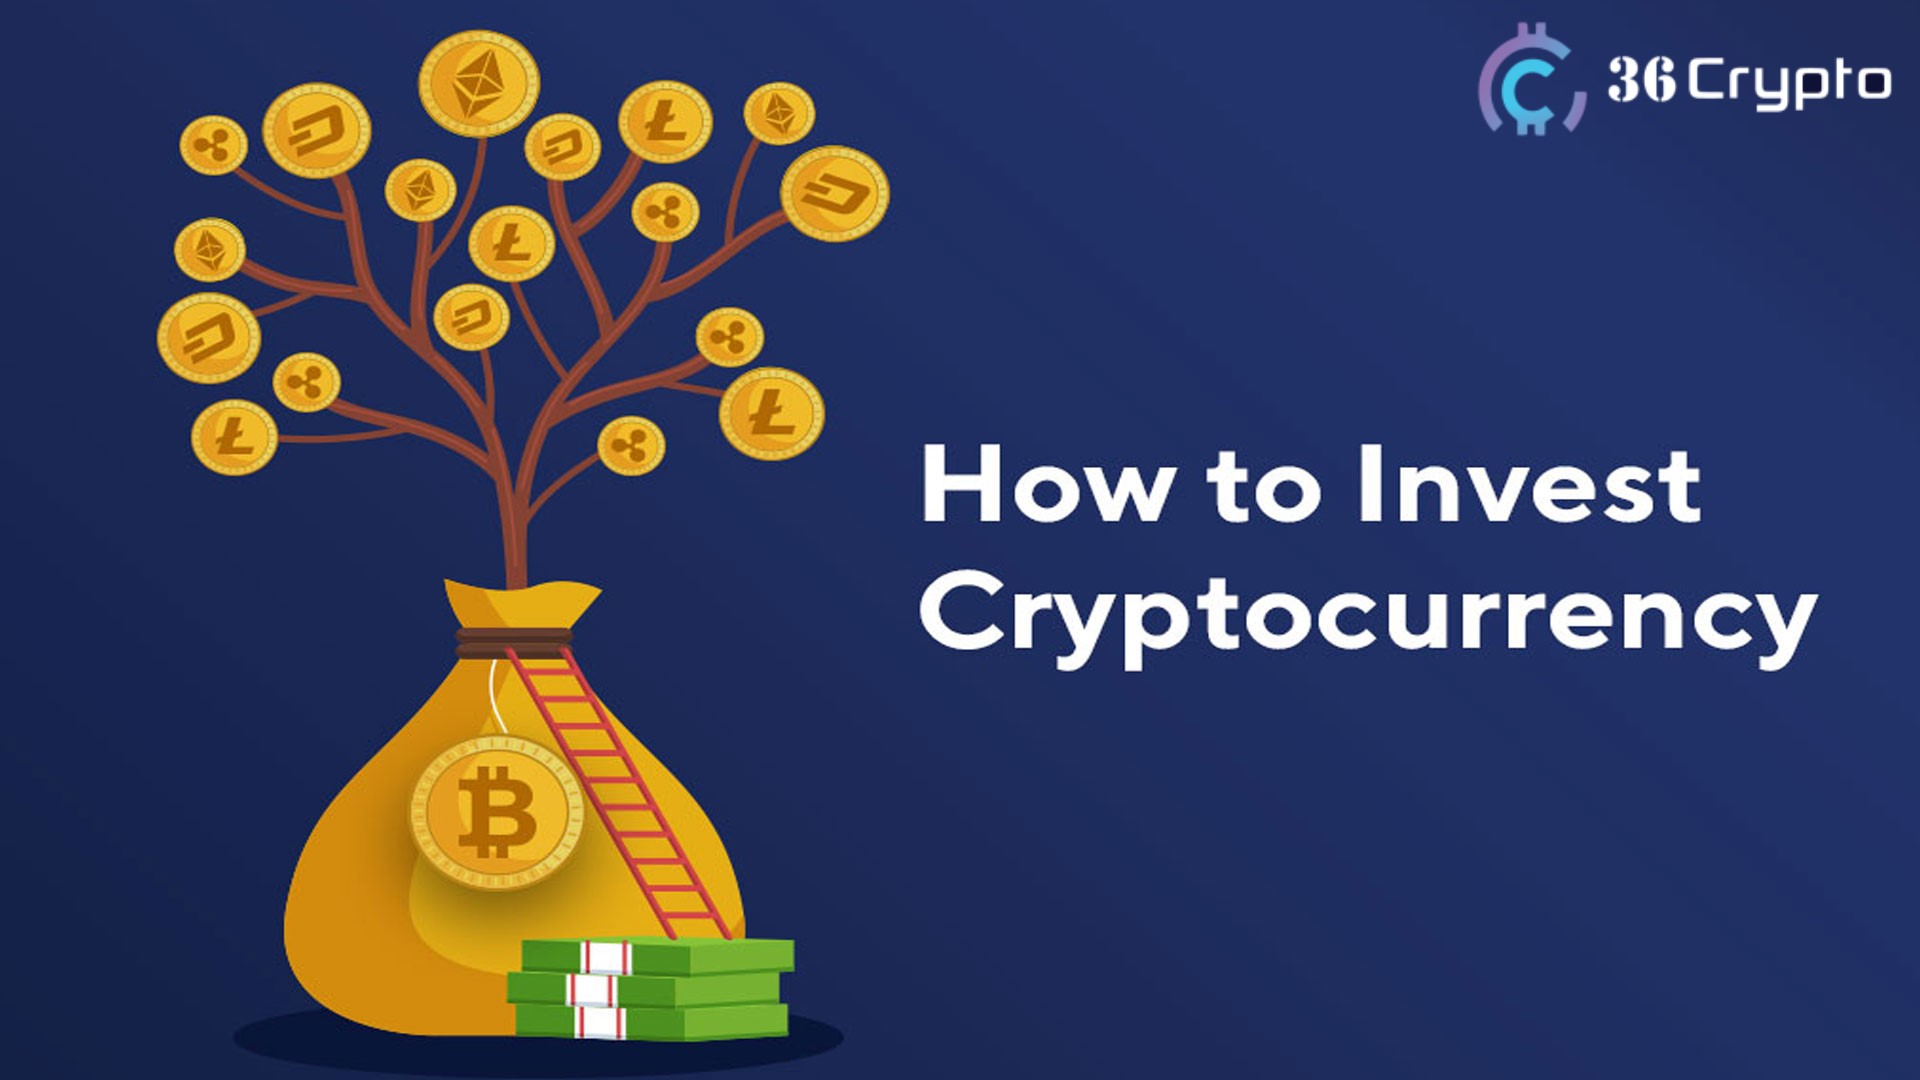 5 Steps to Invest in Cryptocurrency - A Beginners Guide